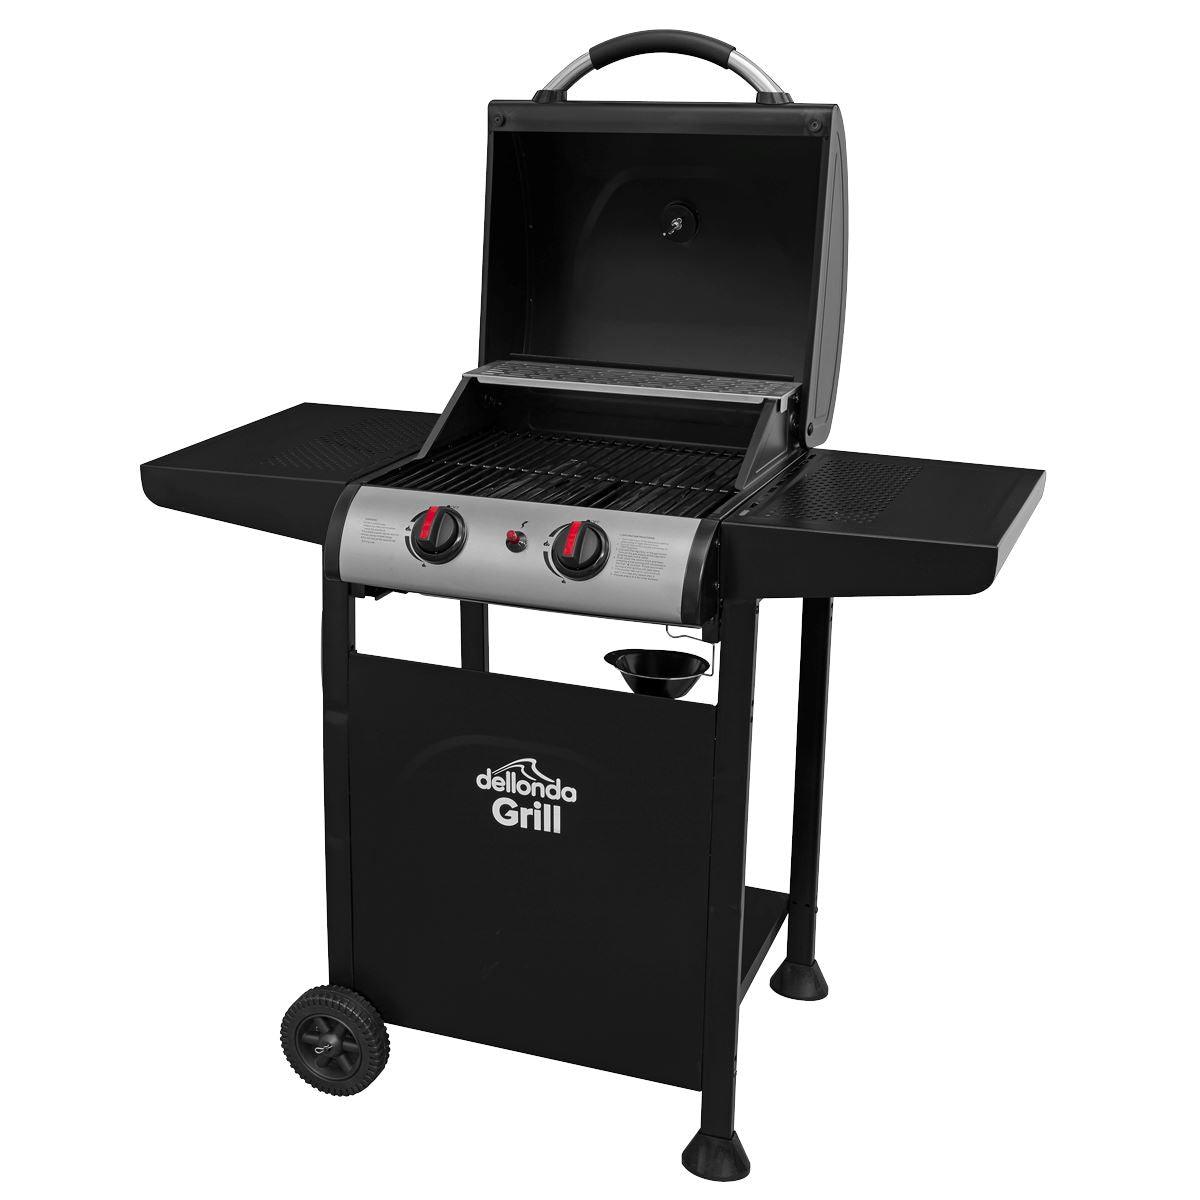 Dellonda 2 Burner Gas BBQ Grill with Ignition & Thermometer - Black/Stainless Steel DG13 - Tools 2U Direct SW